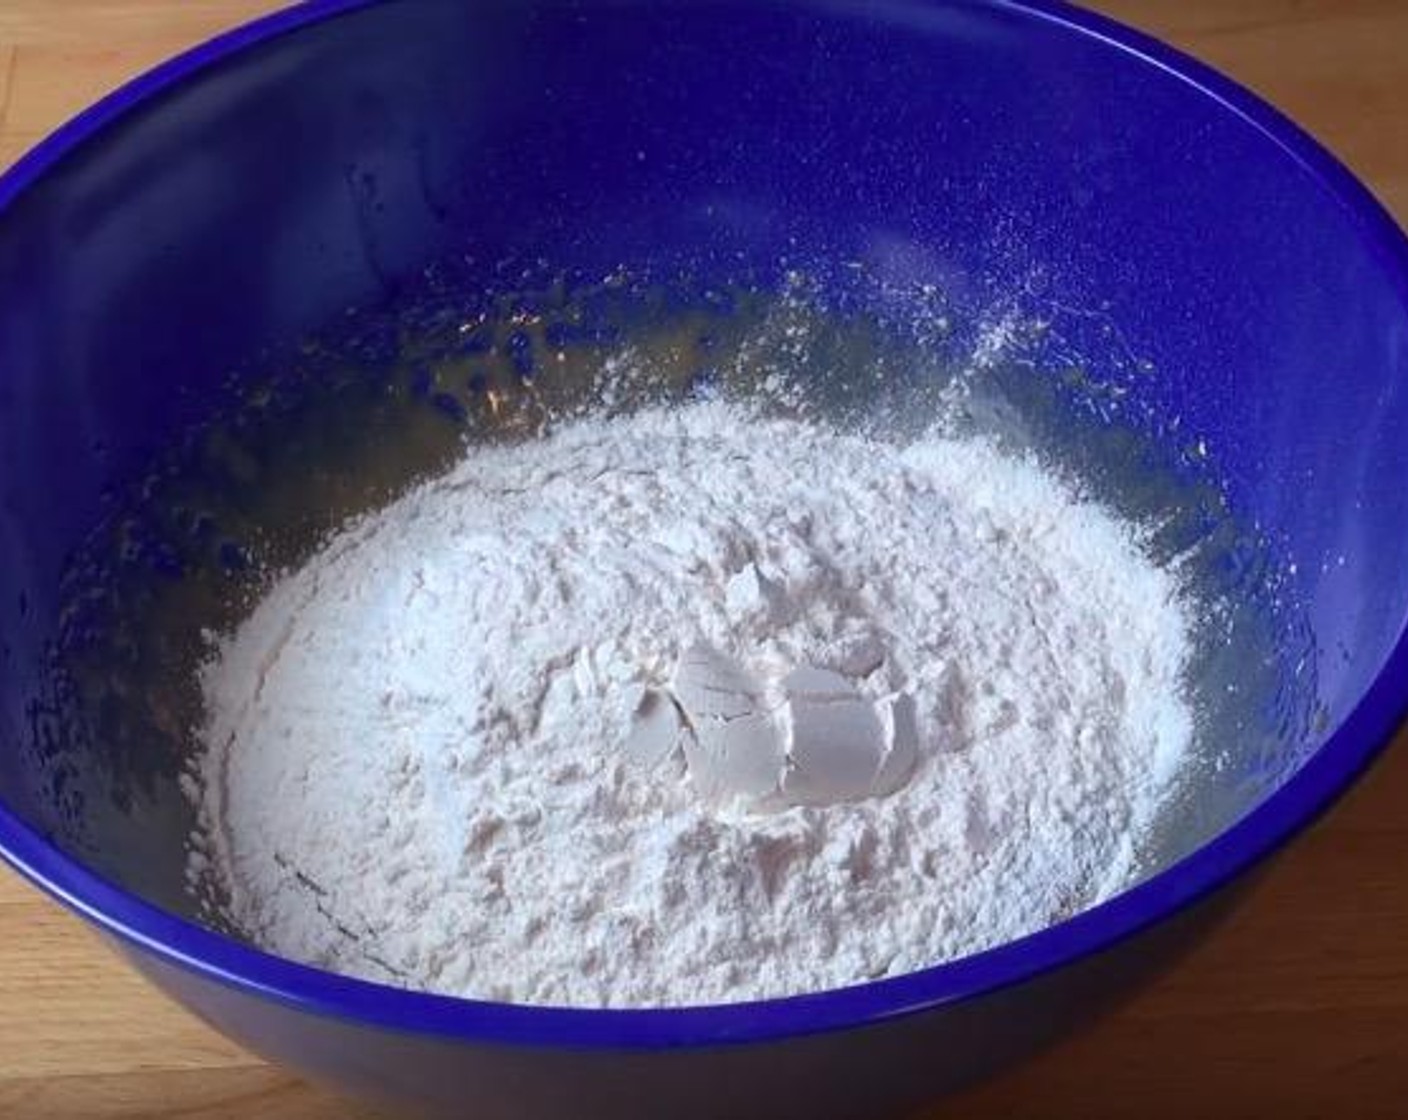 step 2 Add Self-Rising Flour (1 1/2 cups) and Milk (1/2 cup). Fold mixture together until combined.